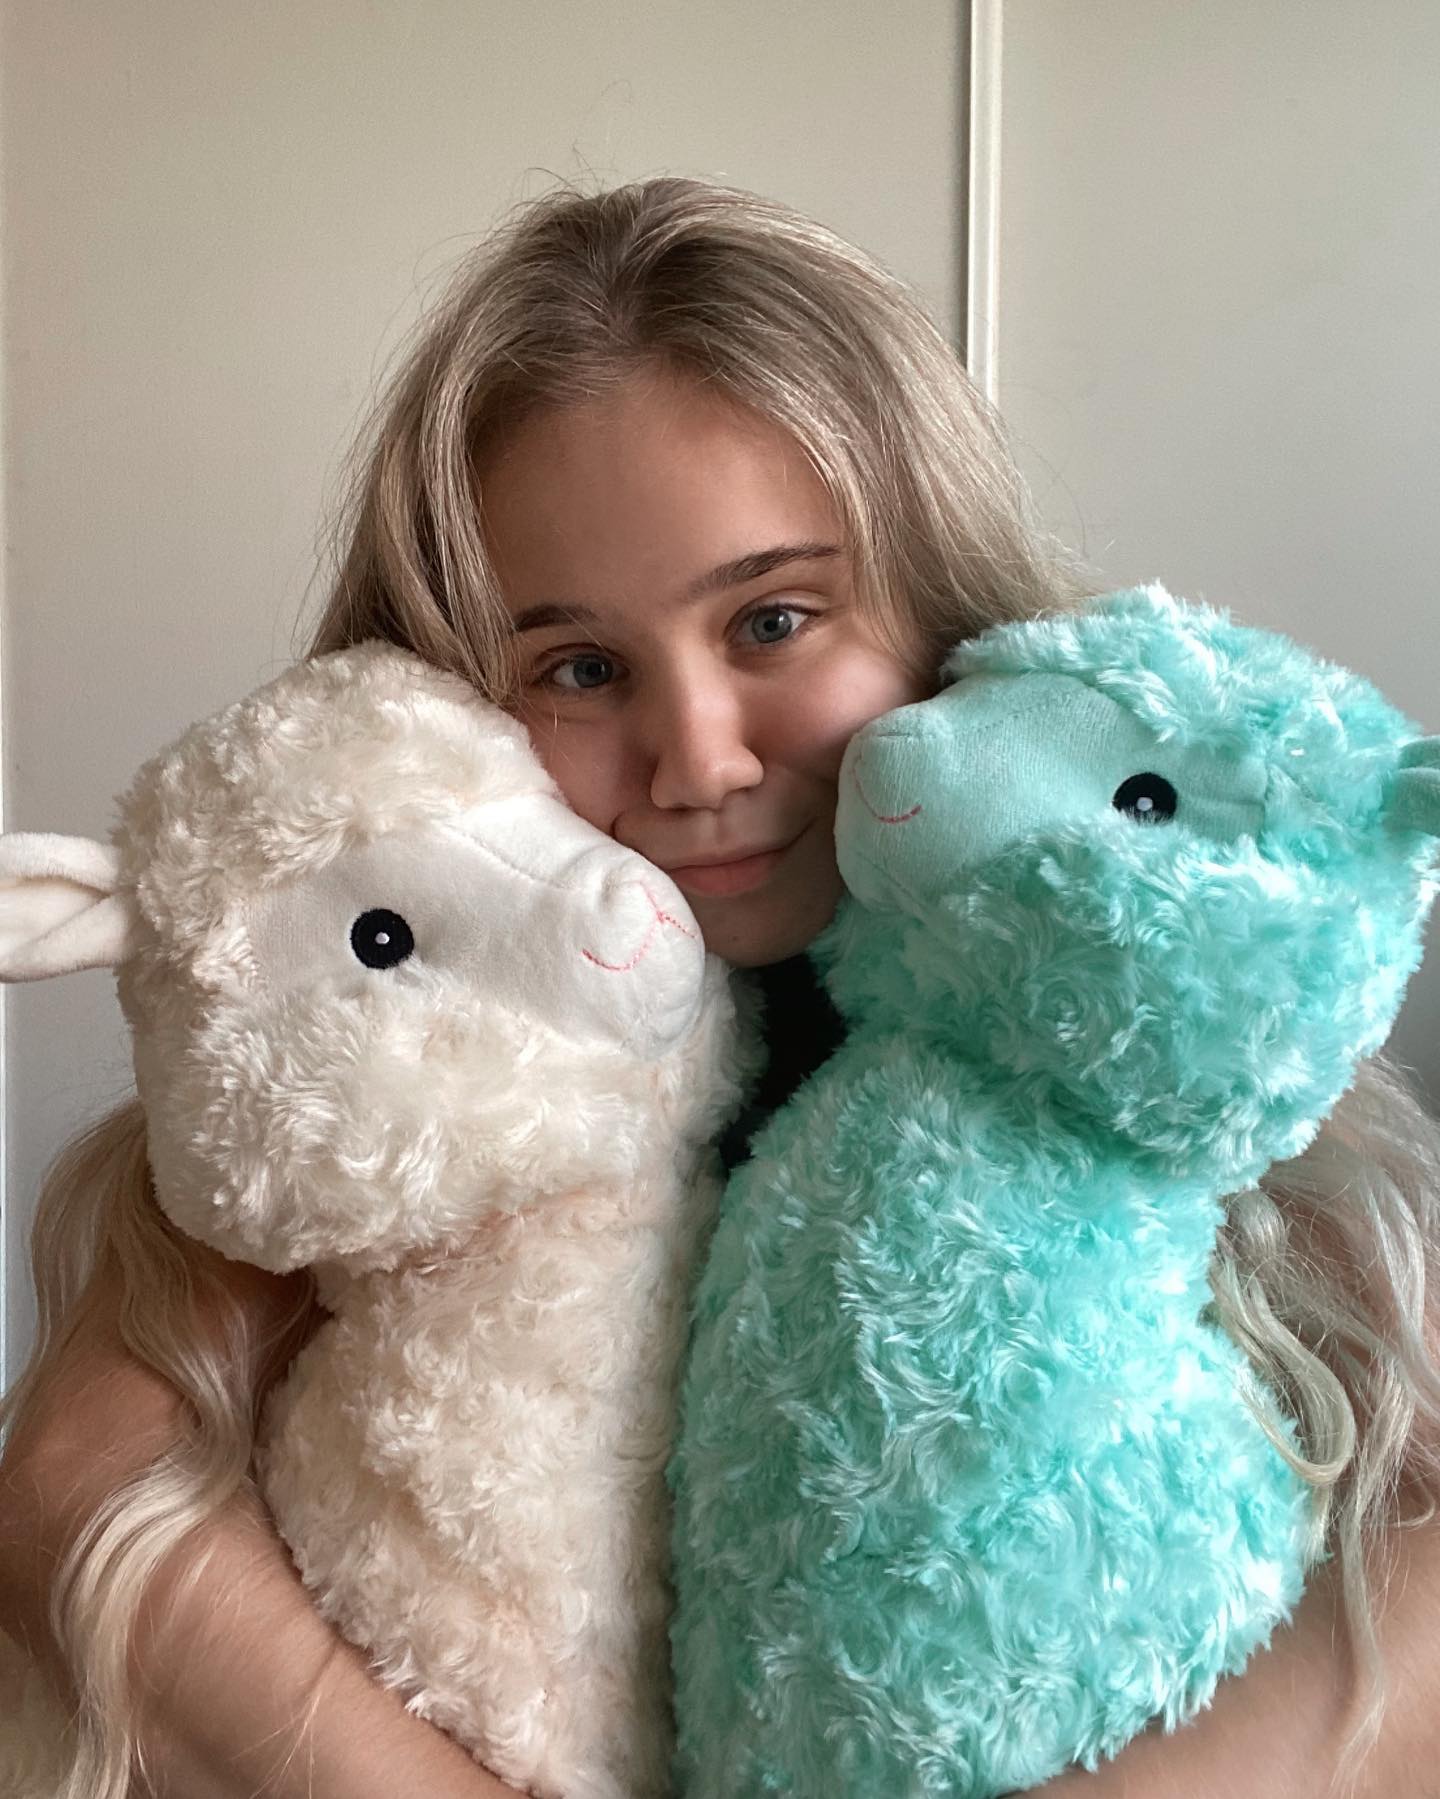 Alisa Goldfinch Shared her Poses with Soft Toys, October 2021